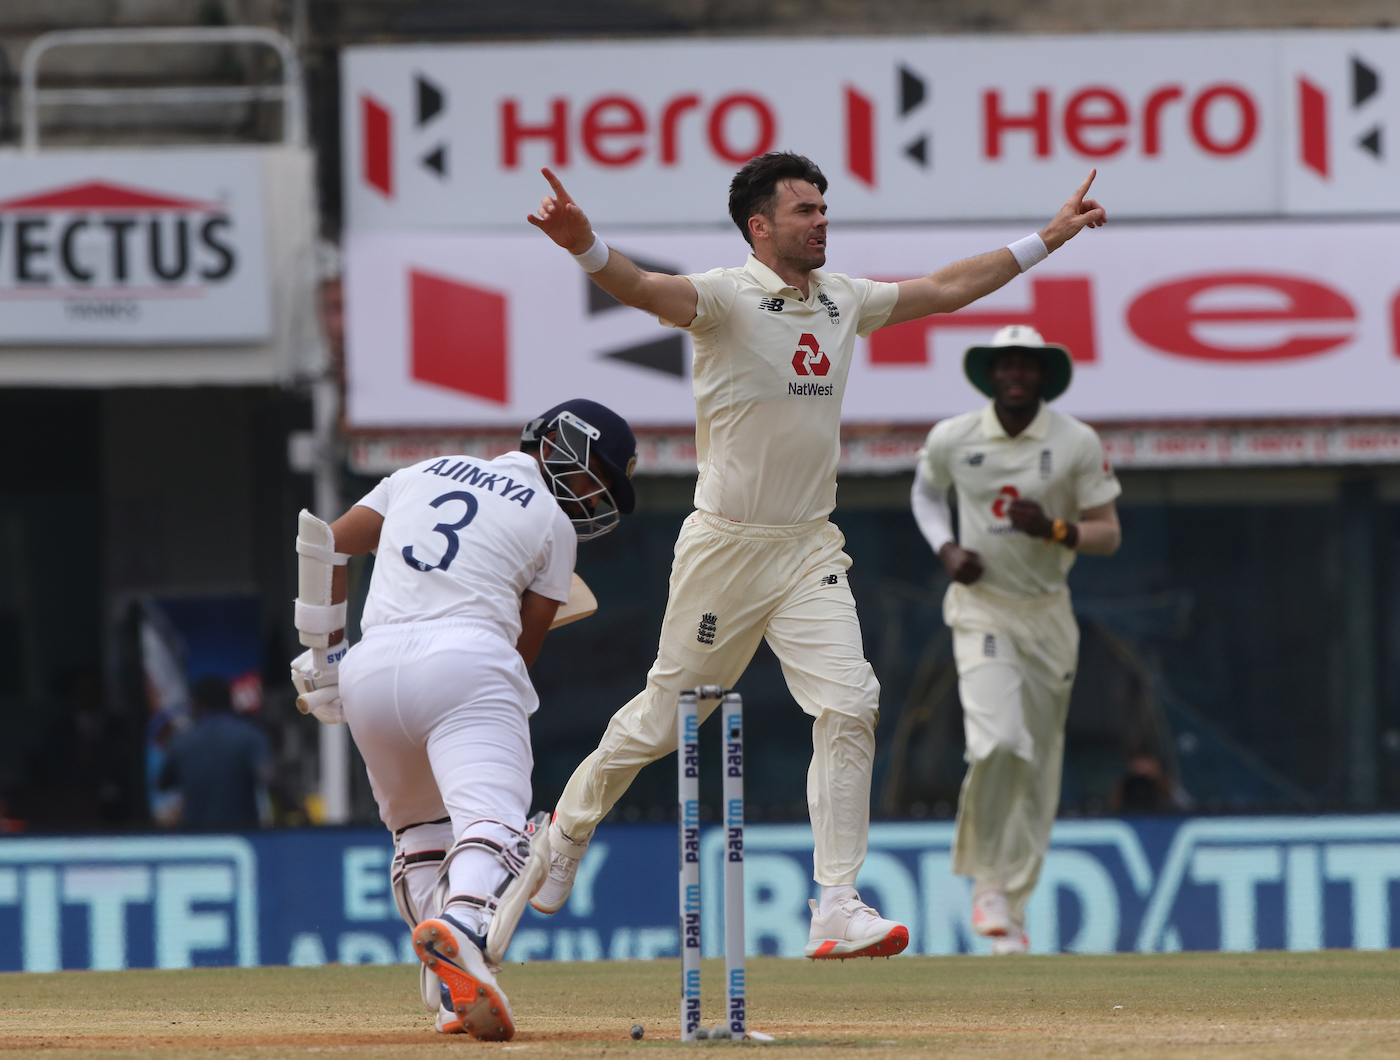 Anderson is likely to go past Anil Kumble's 619-wicket mark in India | BCCI